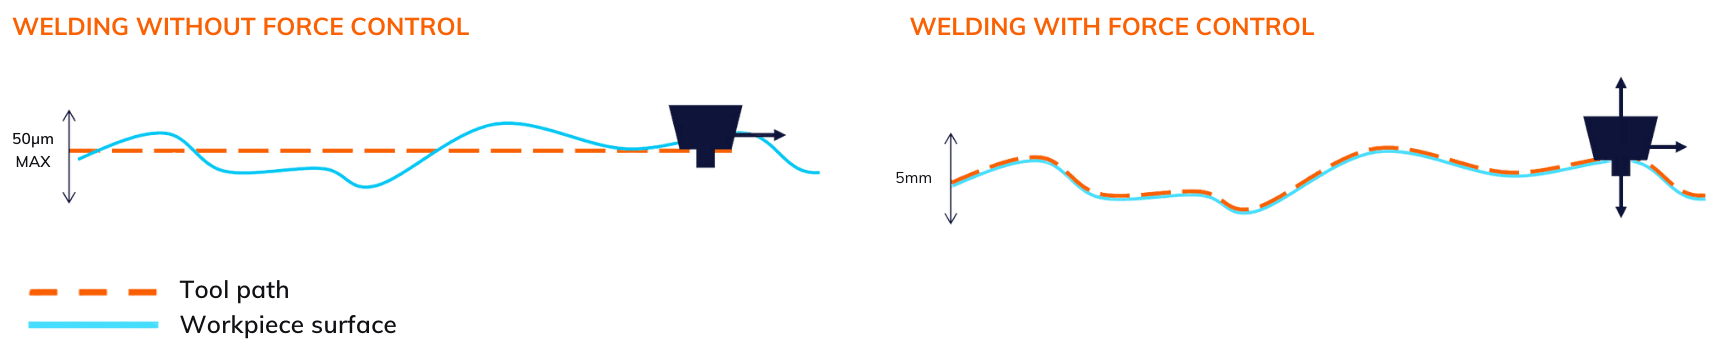 friction stir welding with and without force control